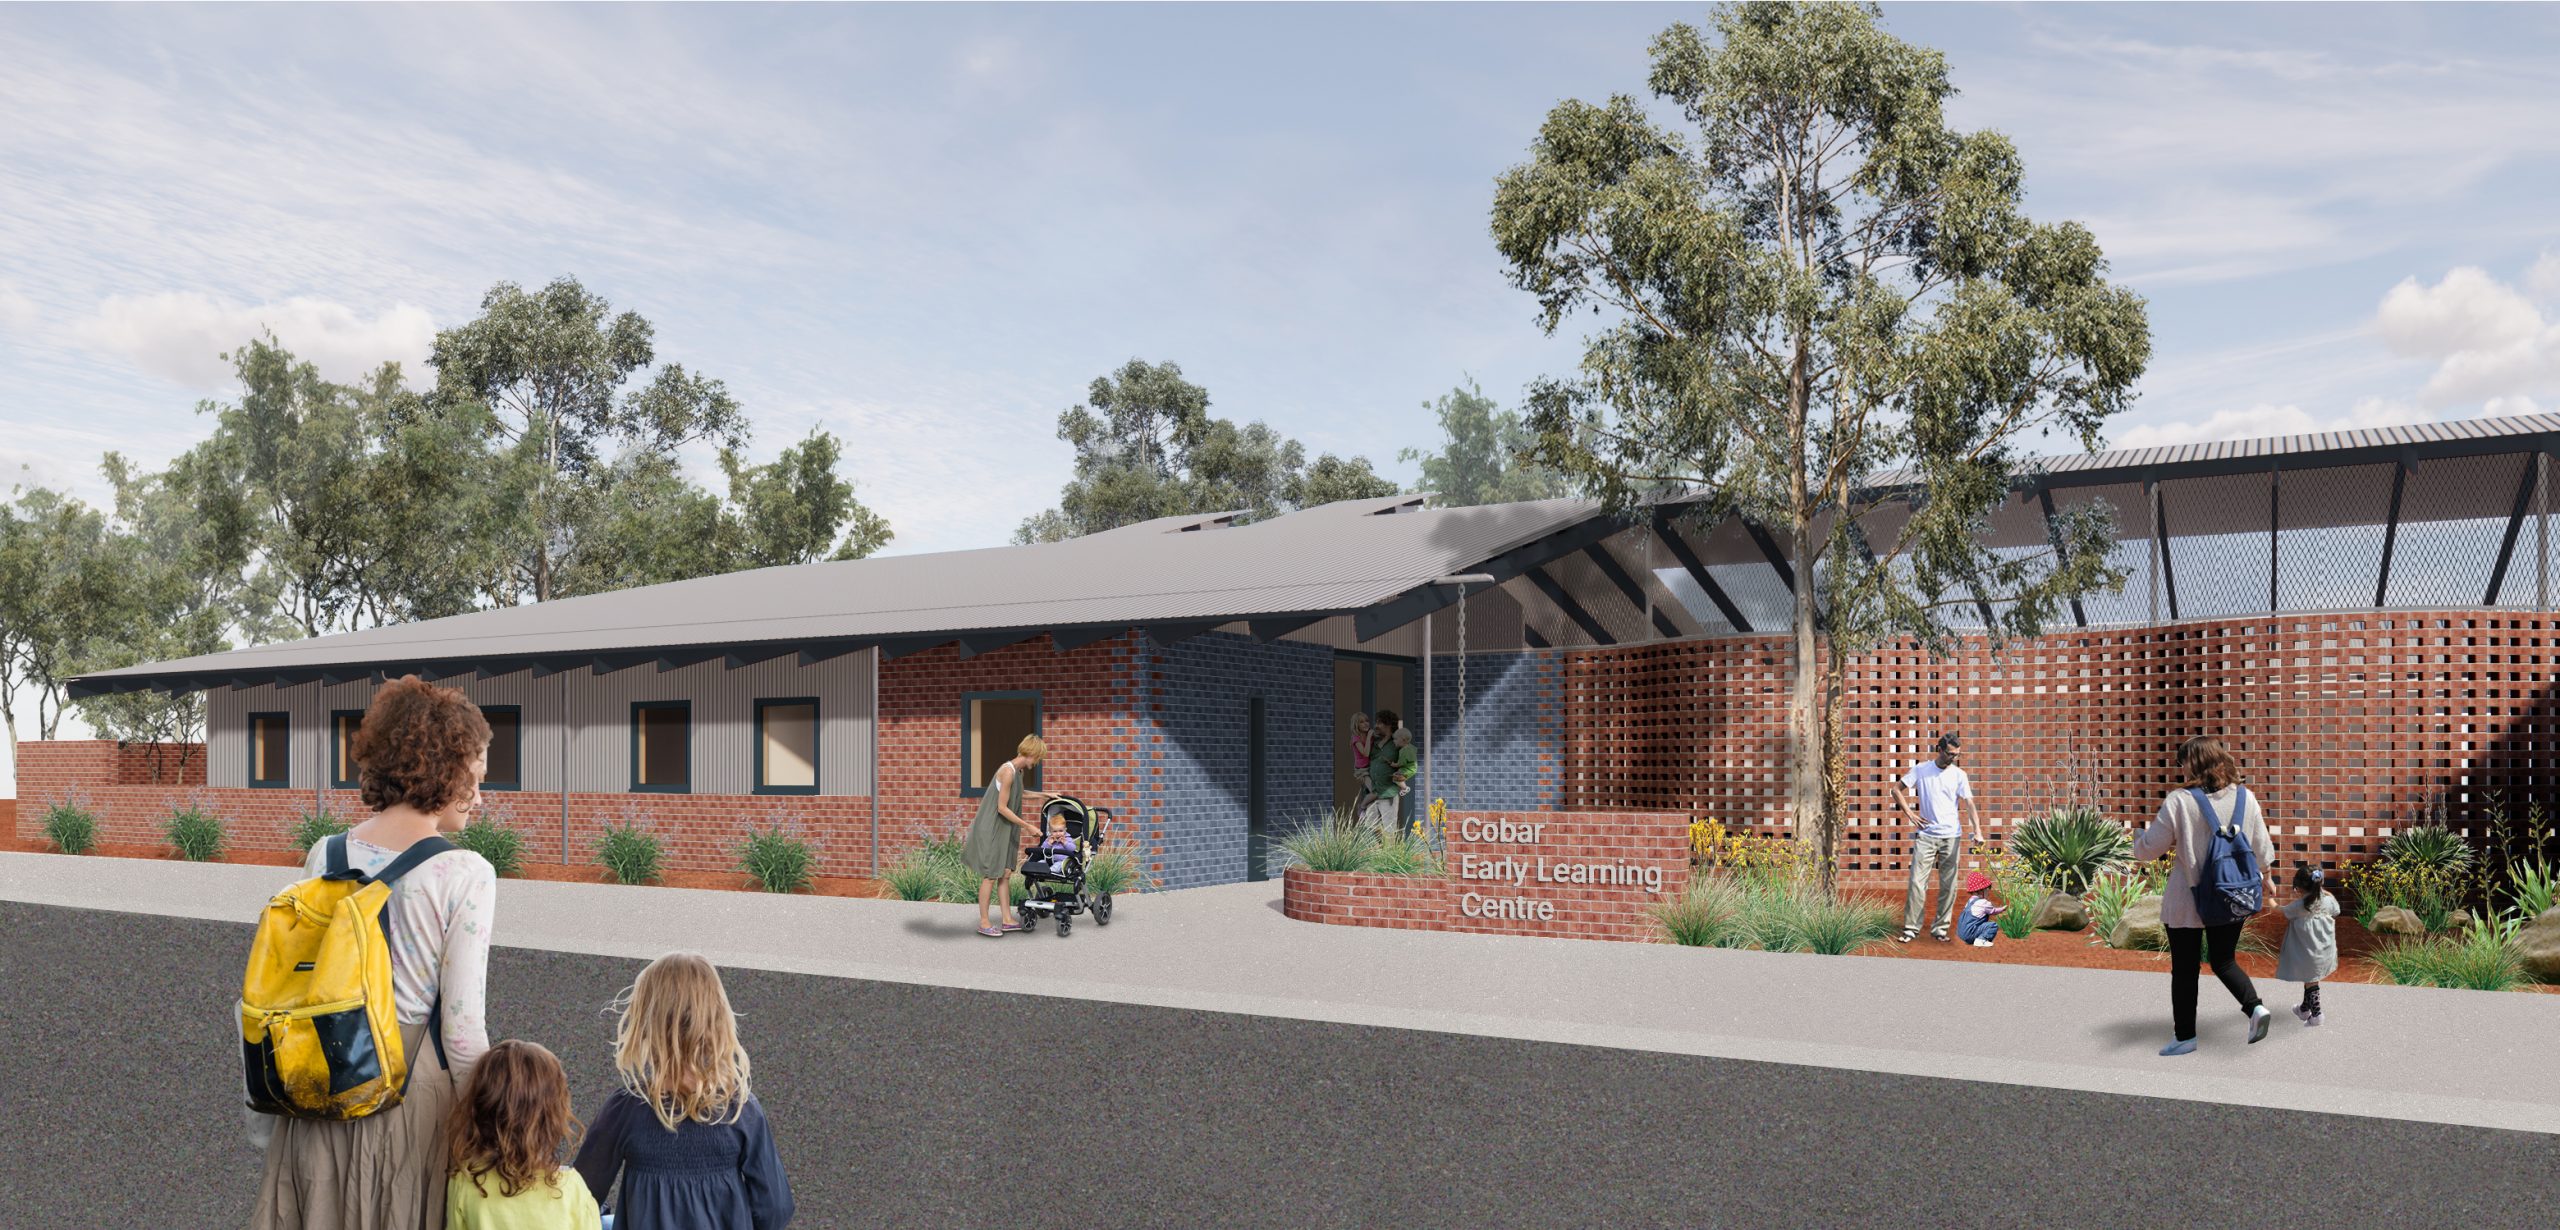 Early Learning Centre - Entrance concept